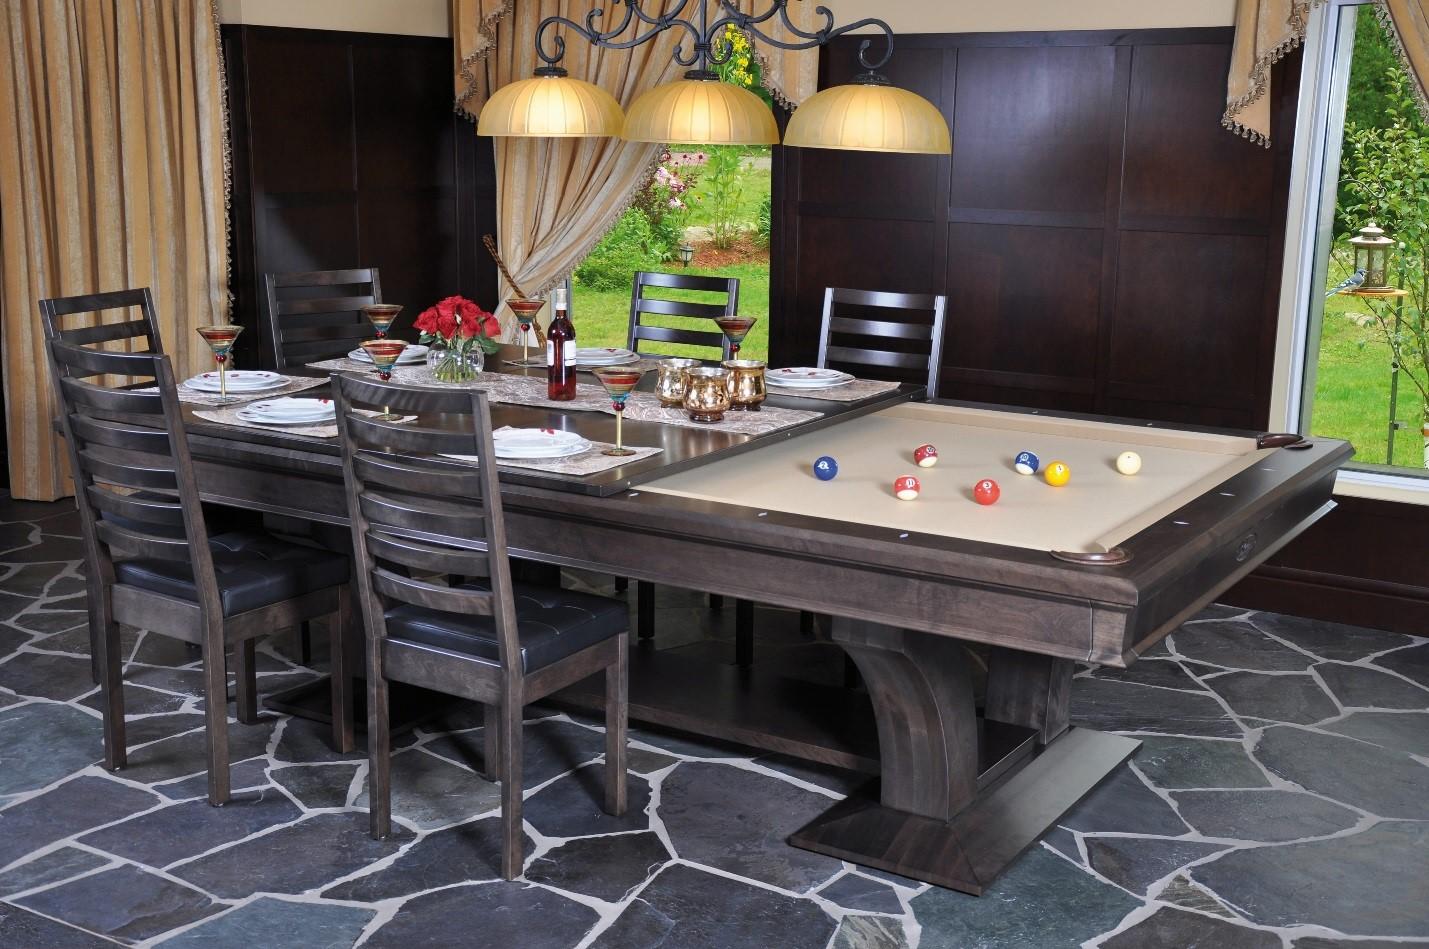 Dining Room Table That Is A Pool Table